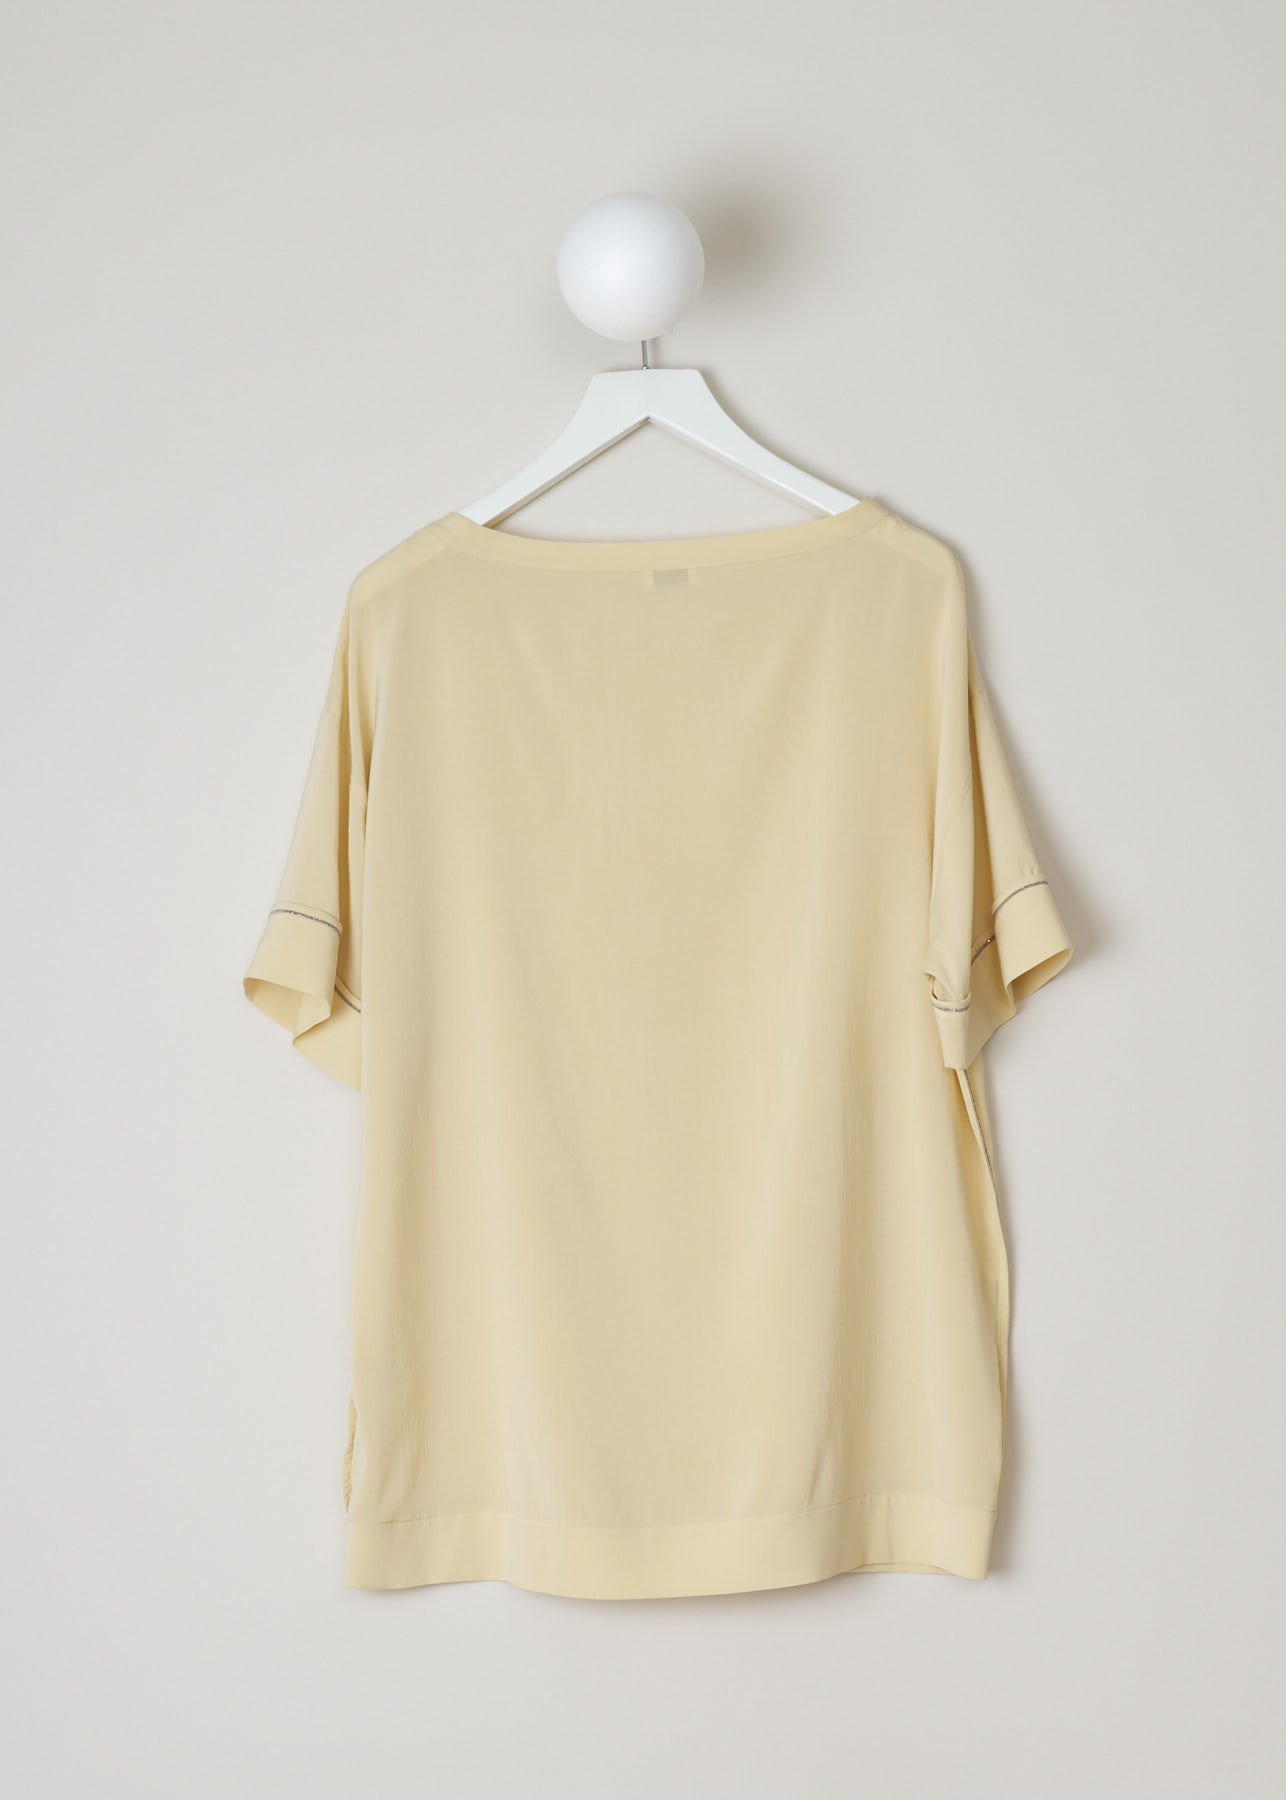 Brunello Cucinelli, 
Silk boxy t-shirt,
M0S28B7108_CF013,back,Oversized fluid silk crepe de Chine t-shirt top. With monili sparkle detail on the left pocket, short sleeves and side seams.